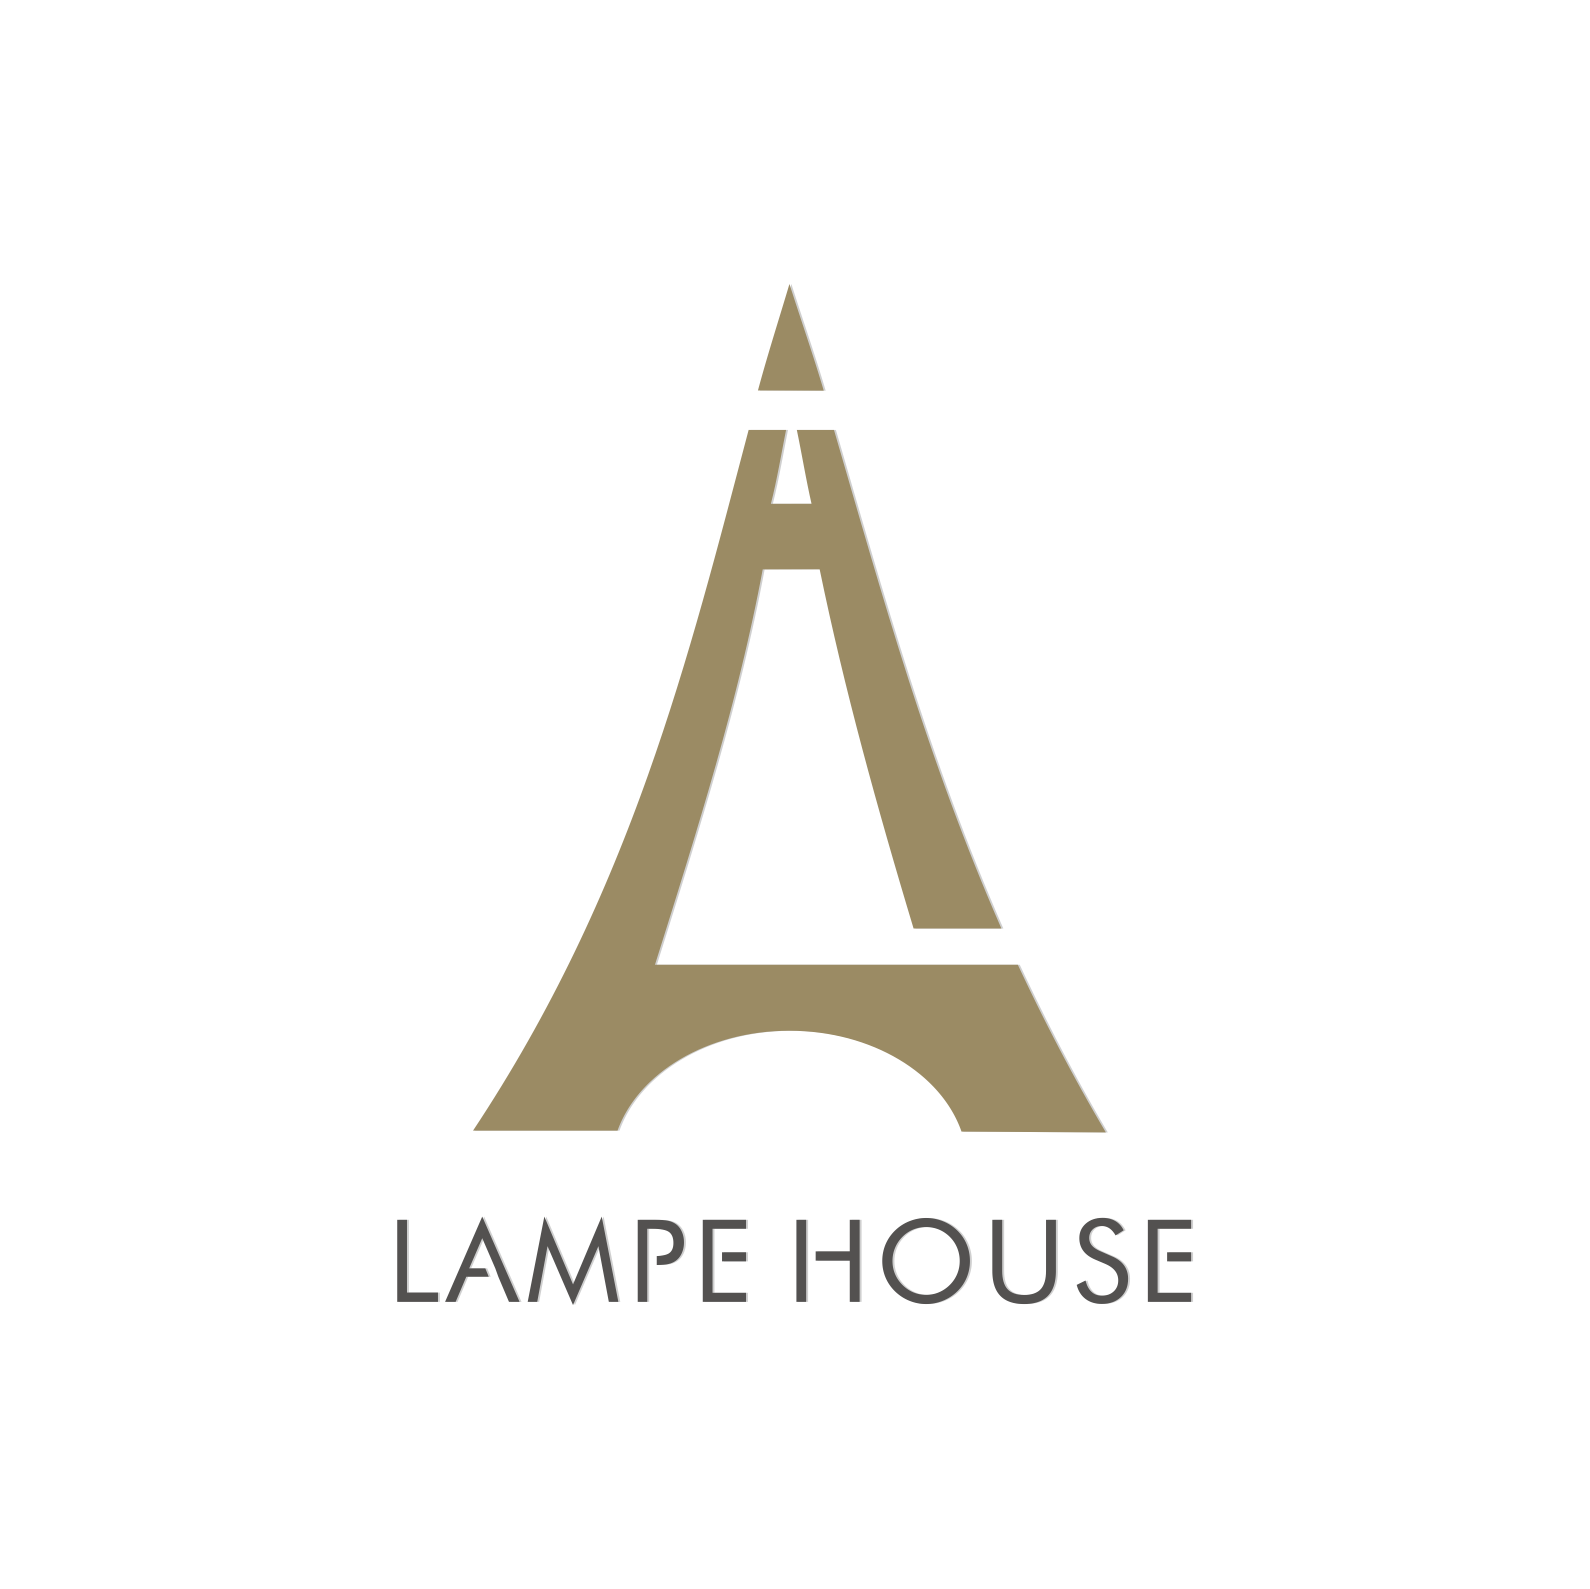 Lampe House is proficient in lighting fixtures and home decoration products. We gather experienced master designers across the globe, only to satisfy you with stylish products, which concentrates their brilliance and expertise.